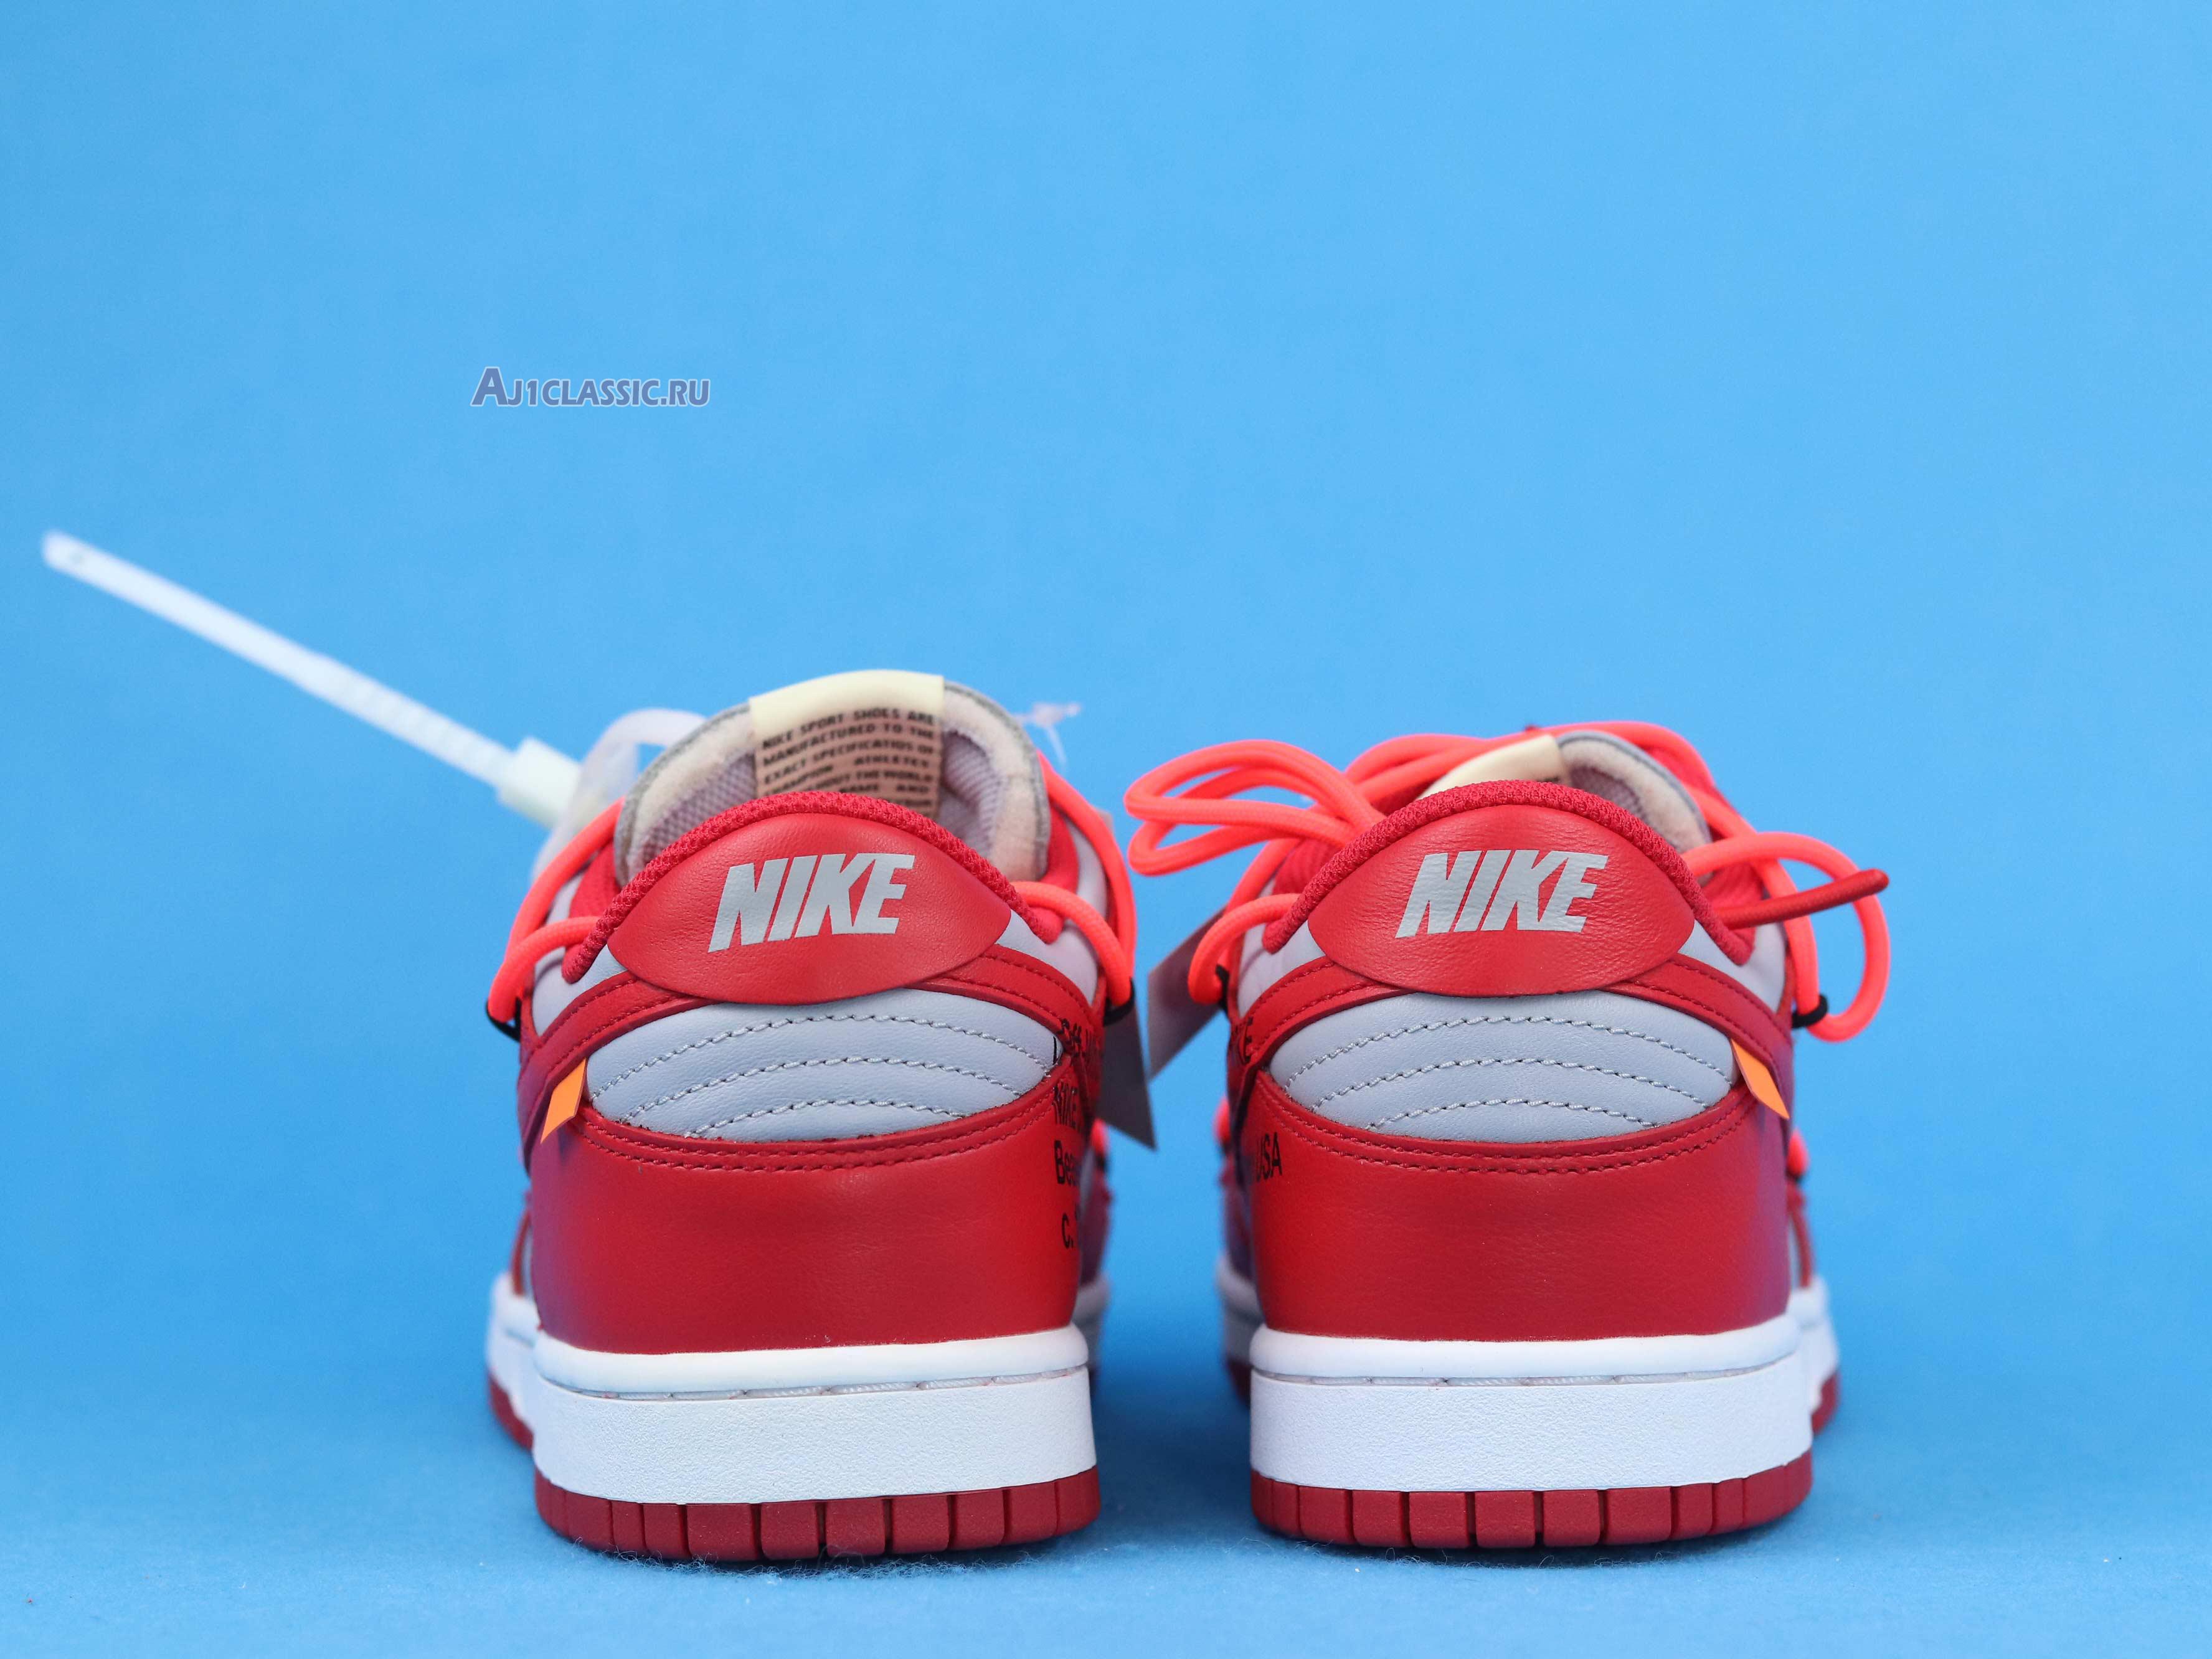 Off-White x Nike Dunk Low "University Red" CT0856-600-02